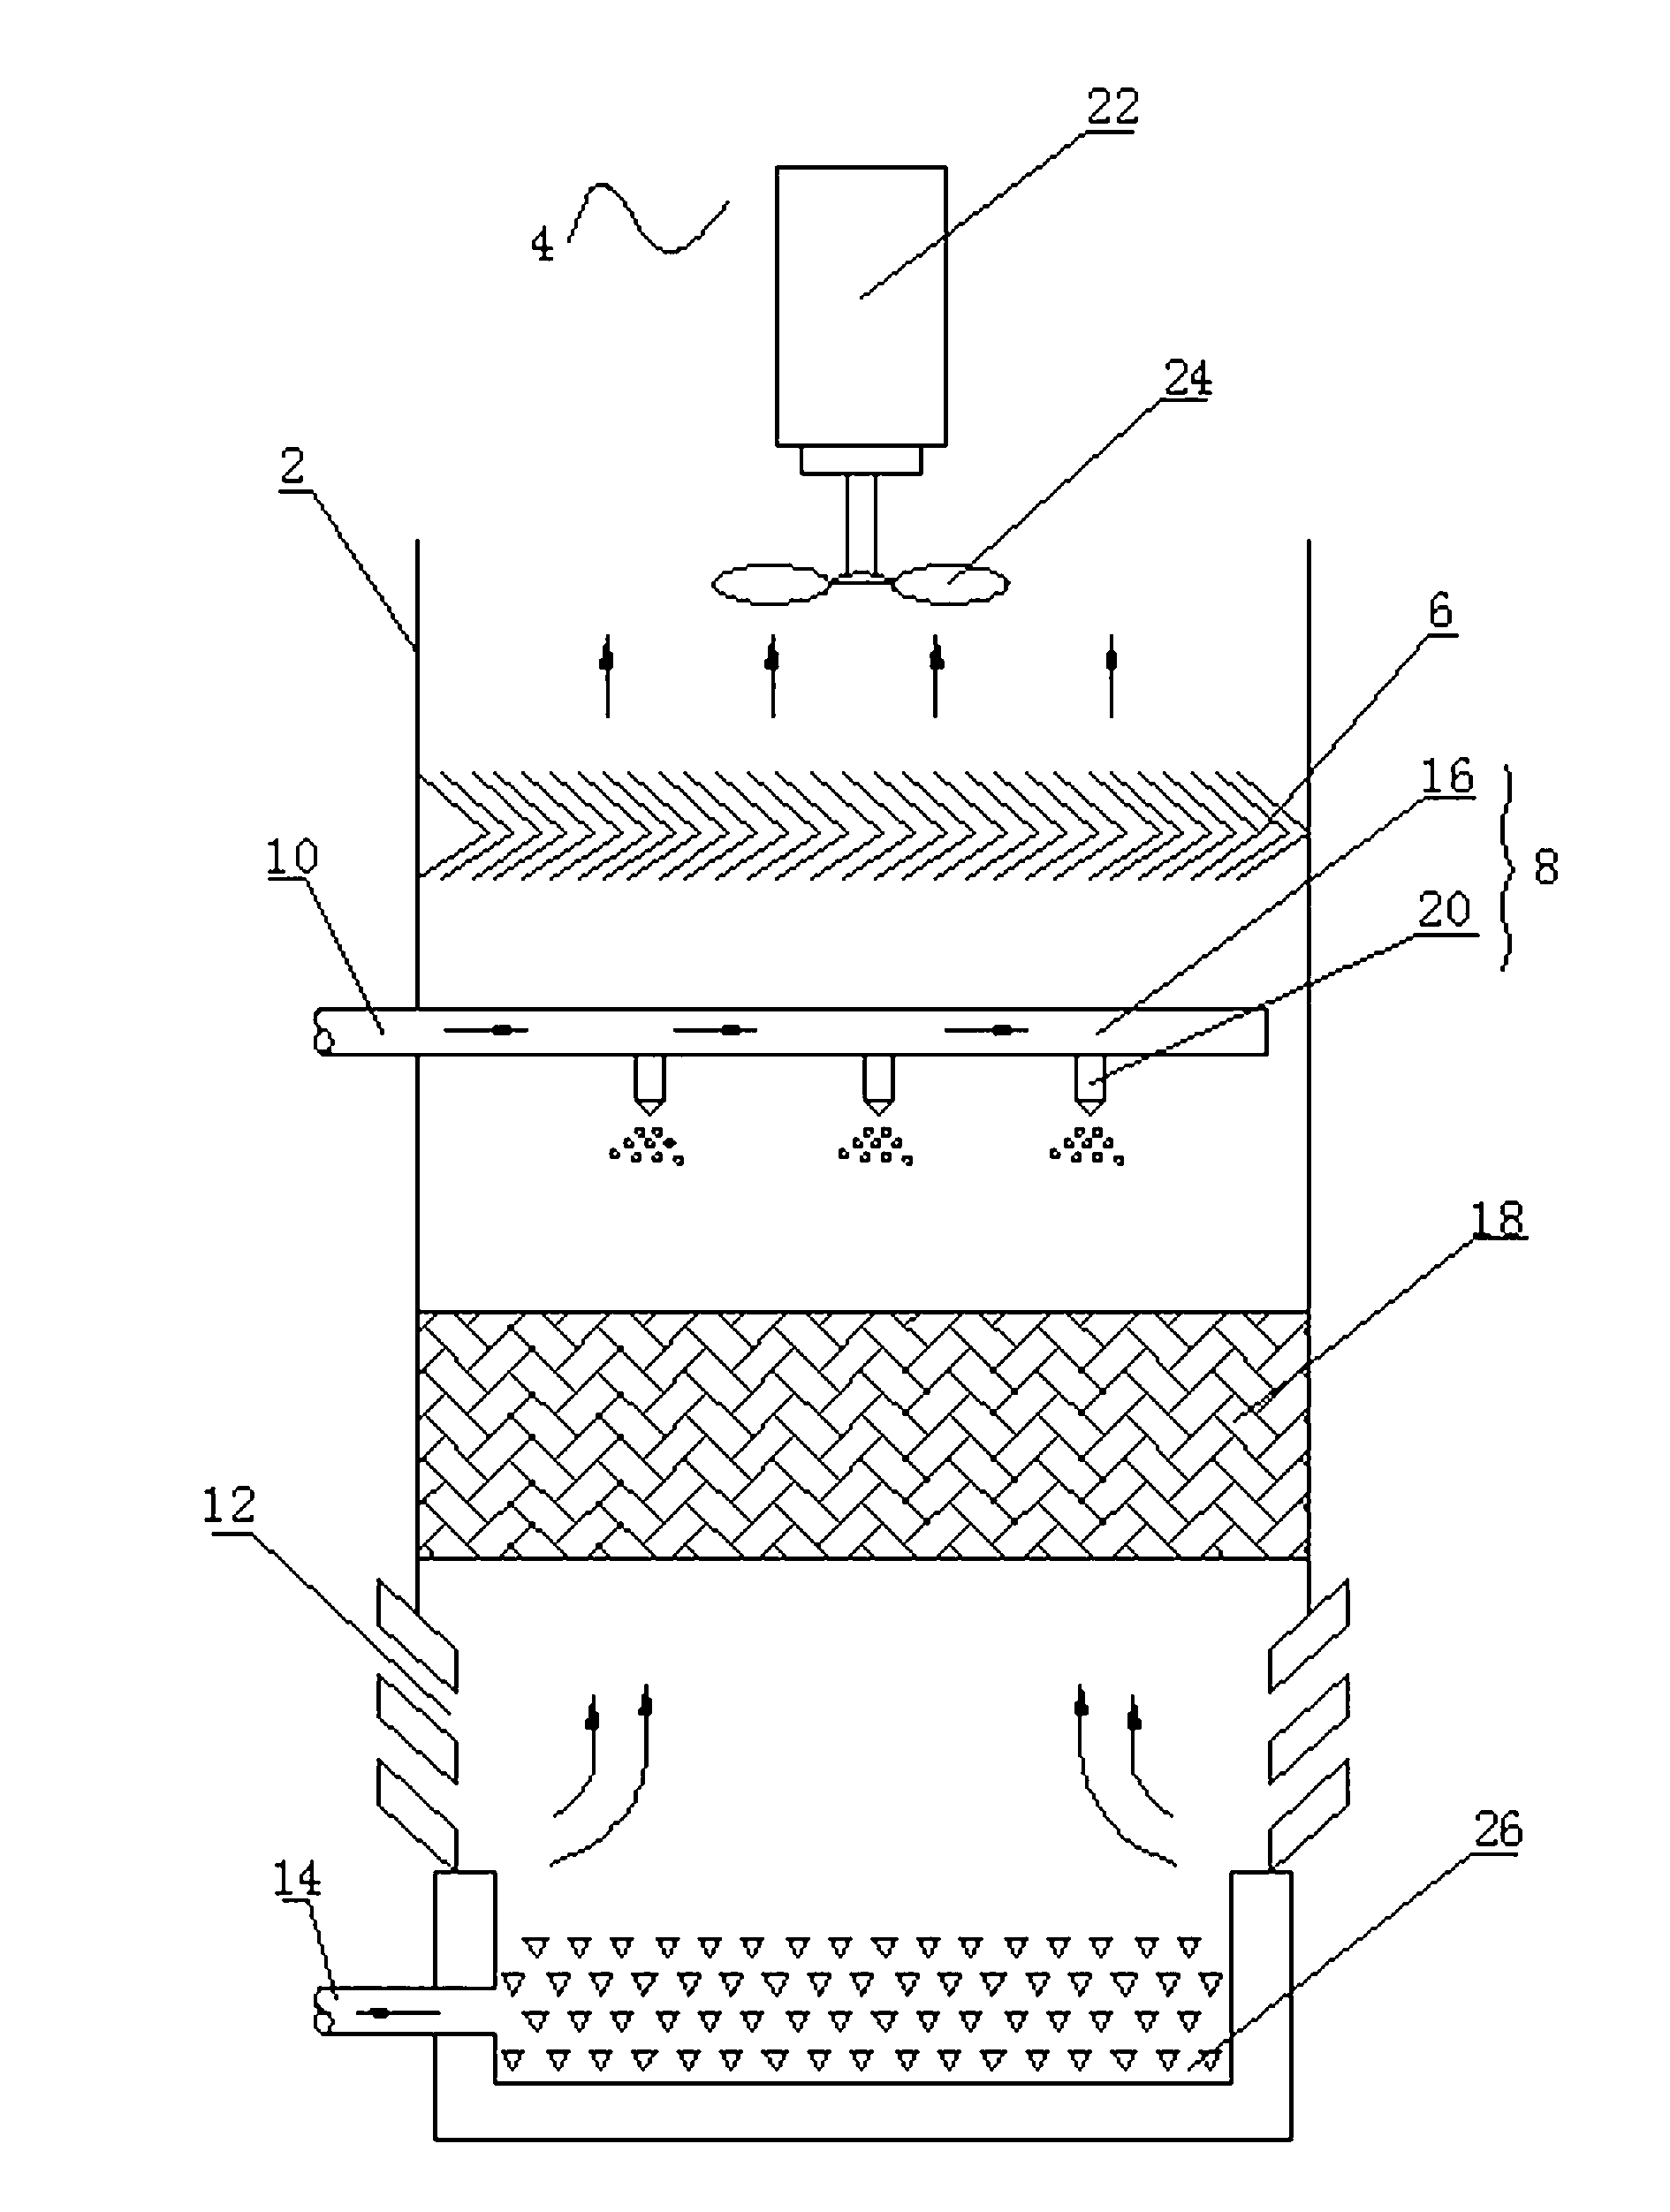 Cooling device of industrial water